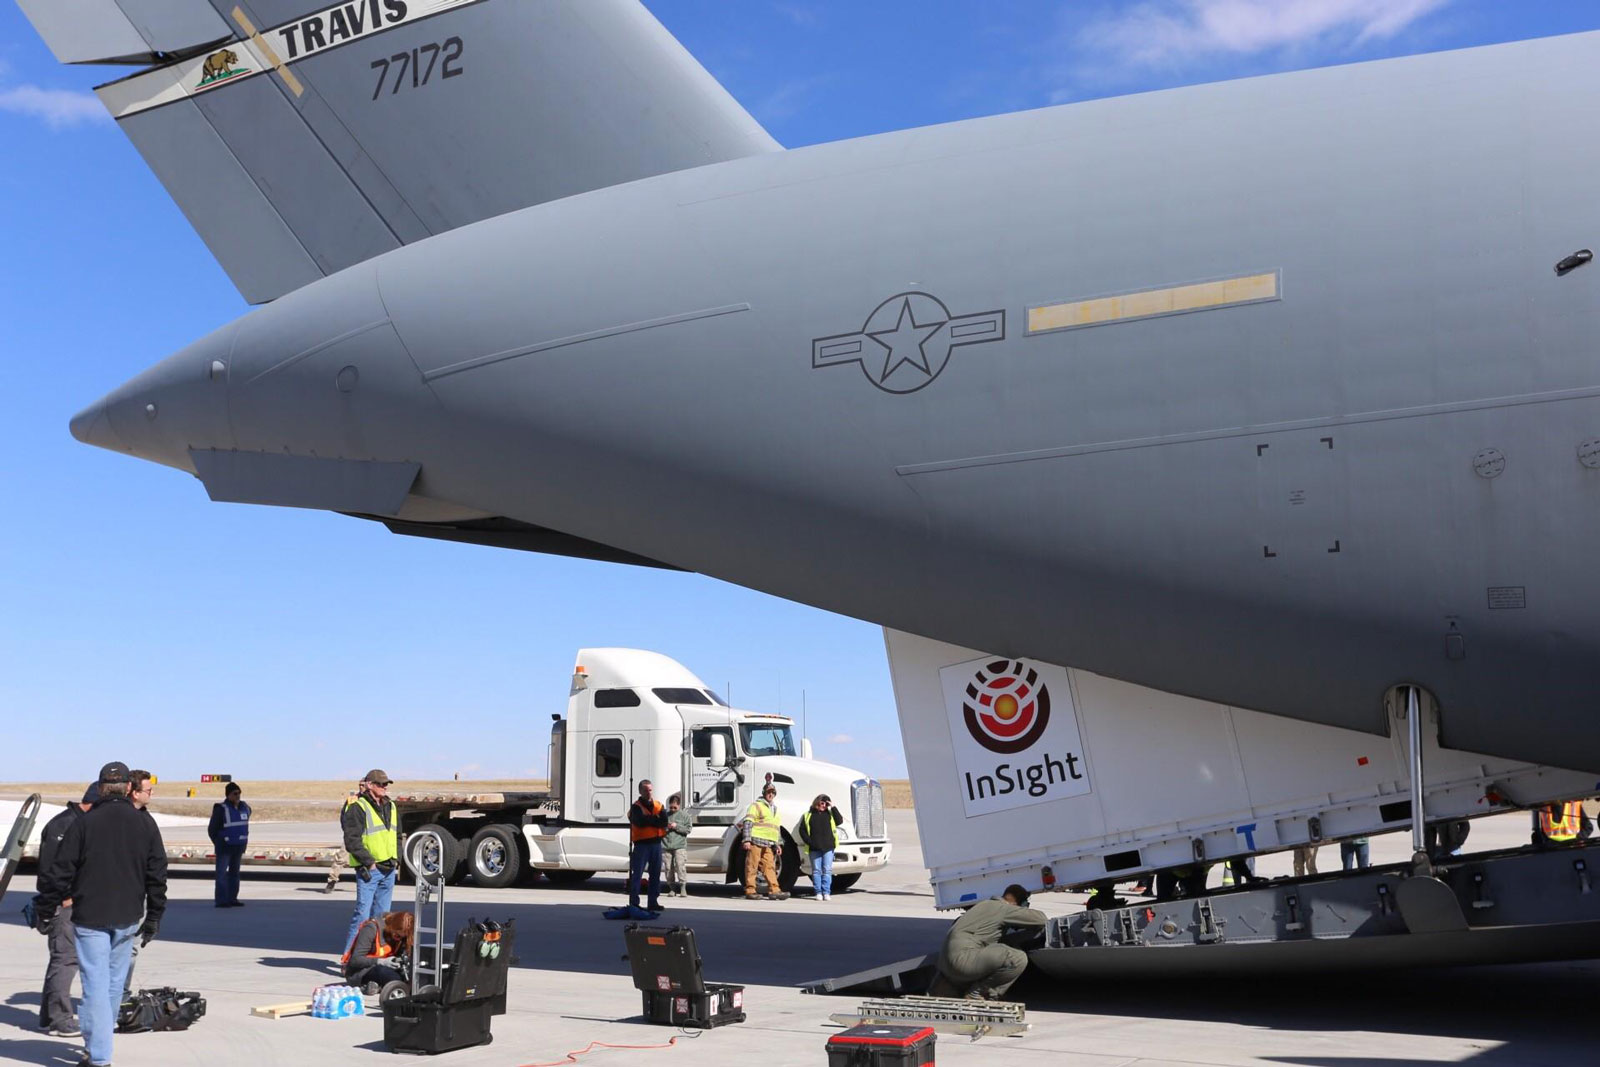 Personnel supporting NASA's InSight mission to Mars load the crated InSight spacecraft into a C-17 cargo aircraft at Buckley Air Force Base, Denver, for shipment to Vandenberg Air Force Base, California. The spacecraft, built in Colorado by Lockheed Martin Space, was shipped February 28, 2018, in preparation for launch from Vandenberg in May 2018.